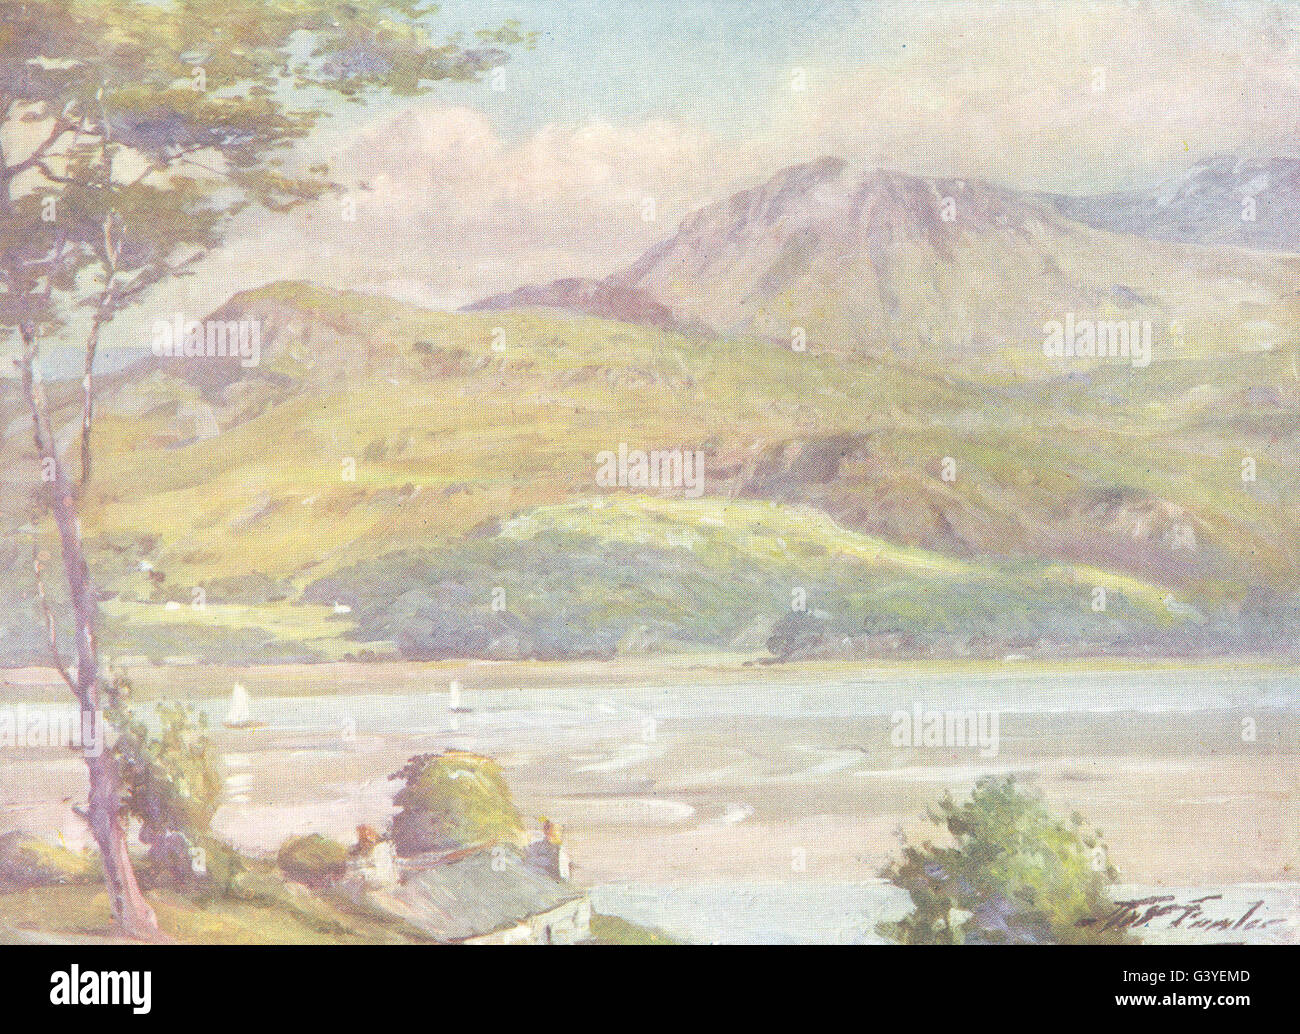 WALES: The Shore near Harlech-Afternoon, antique print 1905 Stock Photo